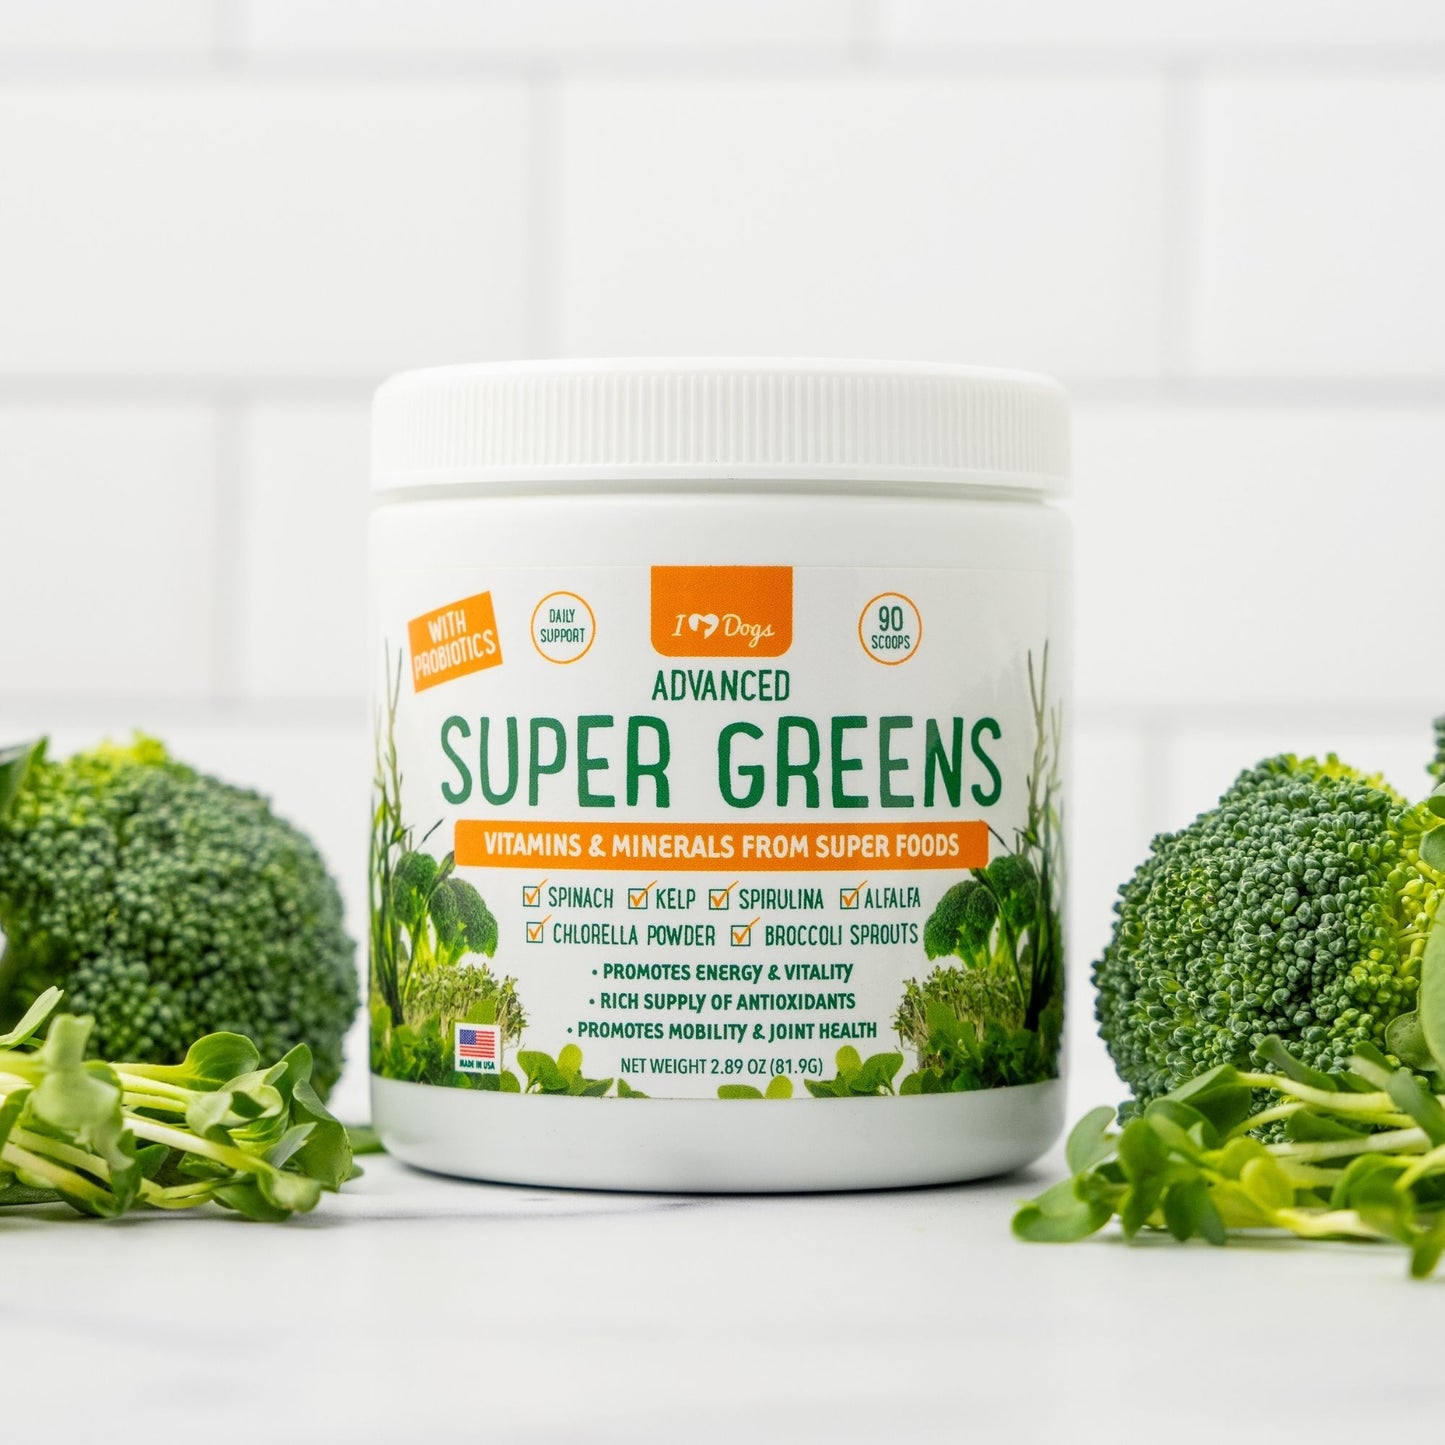 Super-Greens: Vitamin, Mineral & Probiotic Supplement for Dogs with Spirulina, Kelp, Green Tea, Spinach, Chlorella, & Brocolli Sprouts - 90 Scoops